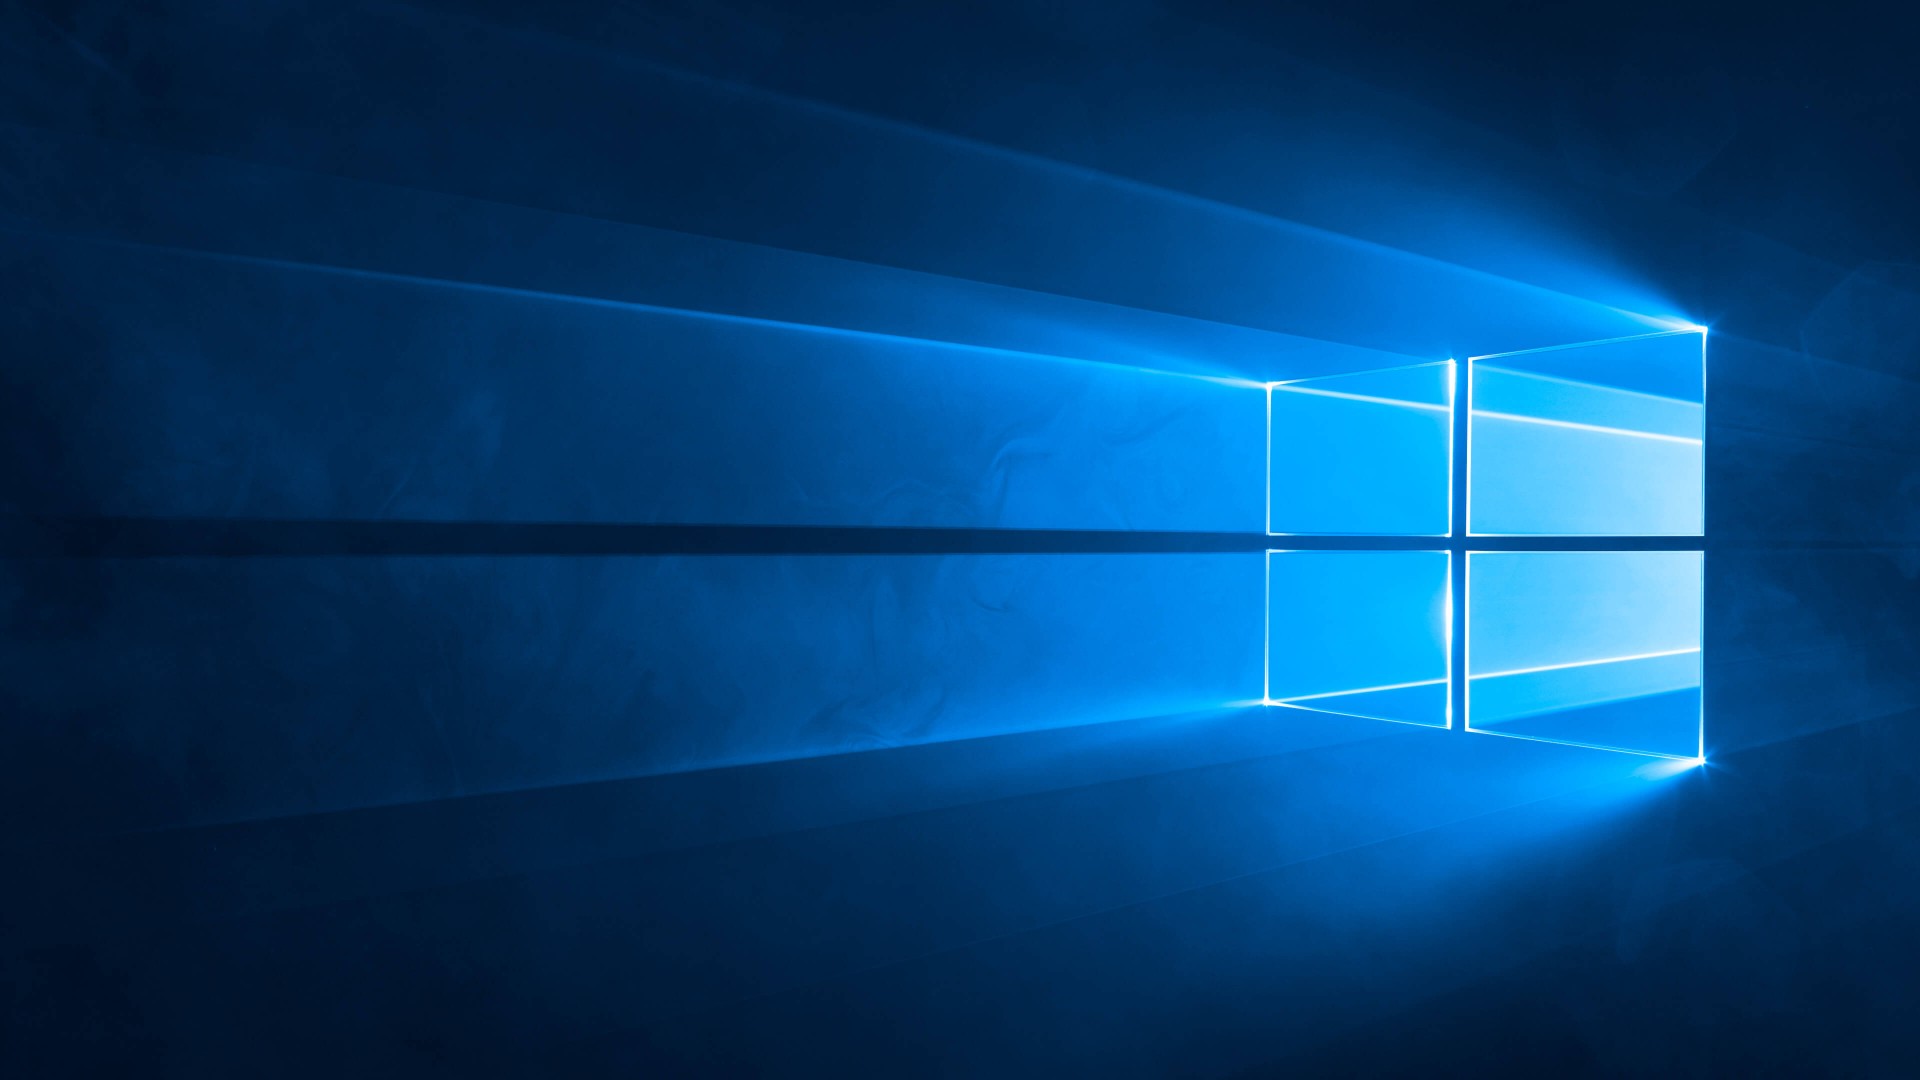 Windows Official HD Wallpaper For X